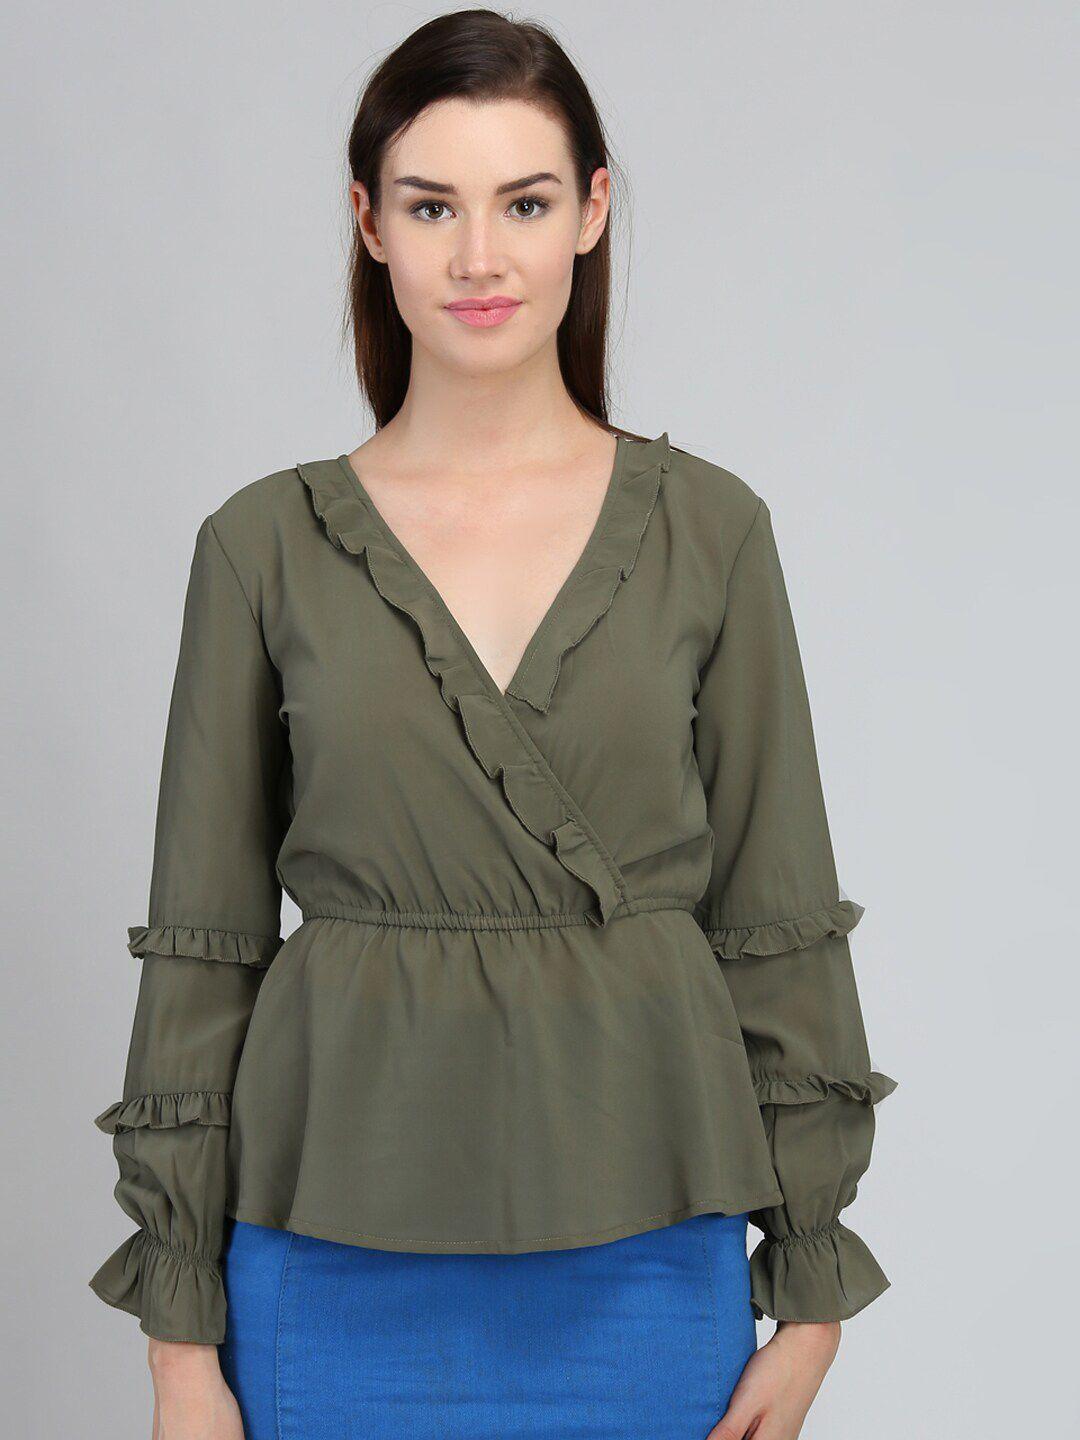 dodo & moa olive green crepe cinched waist top